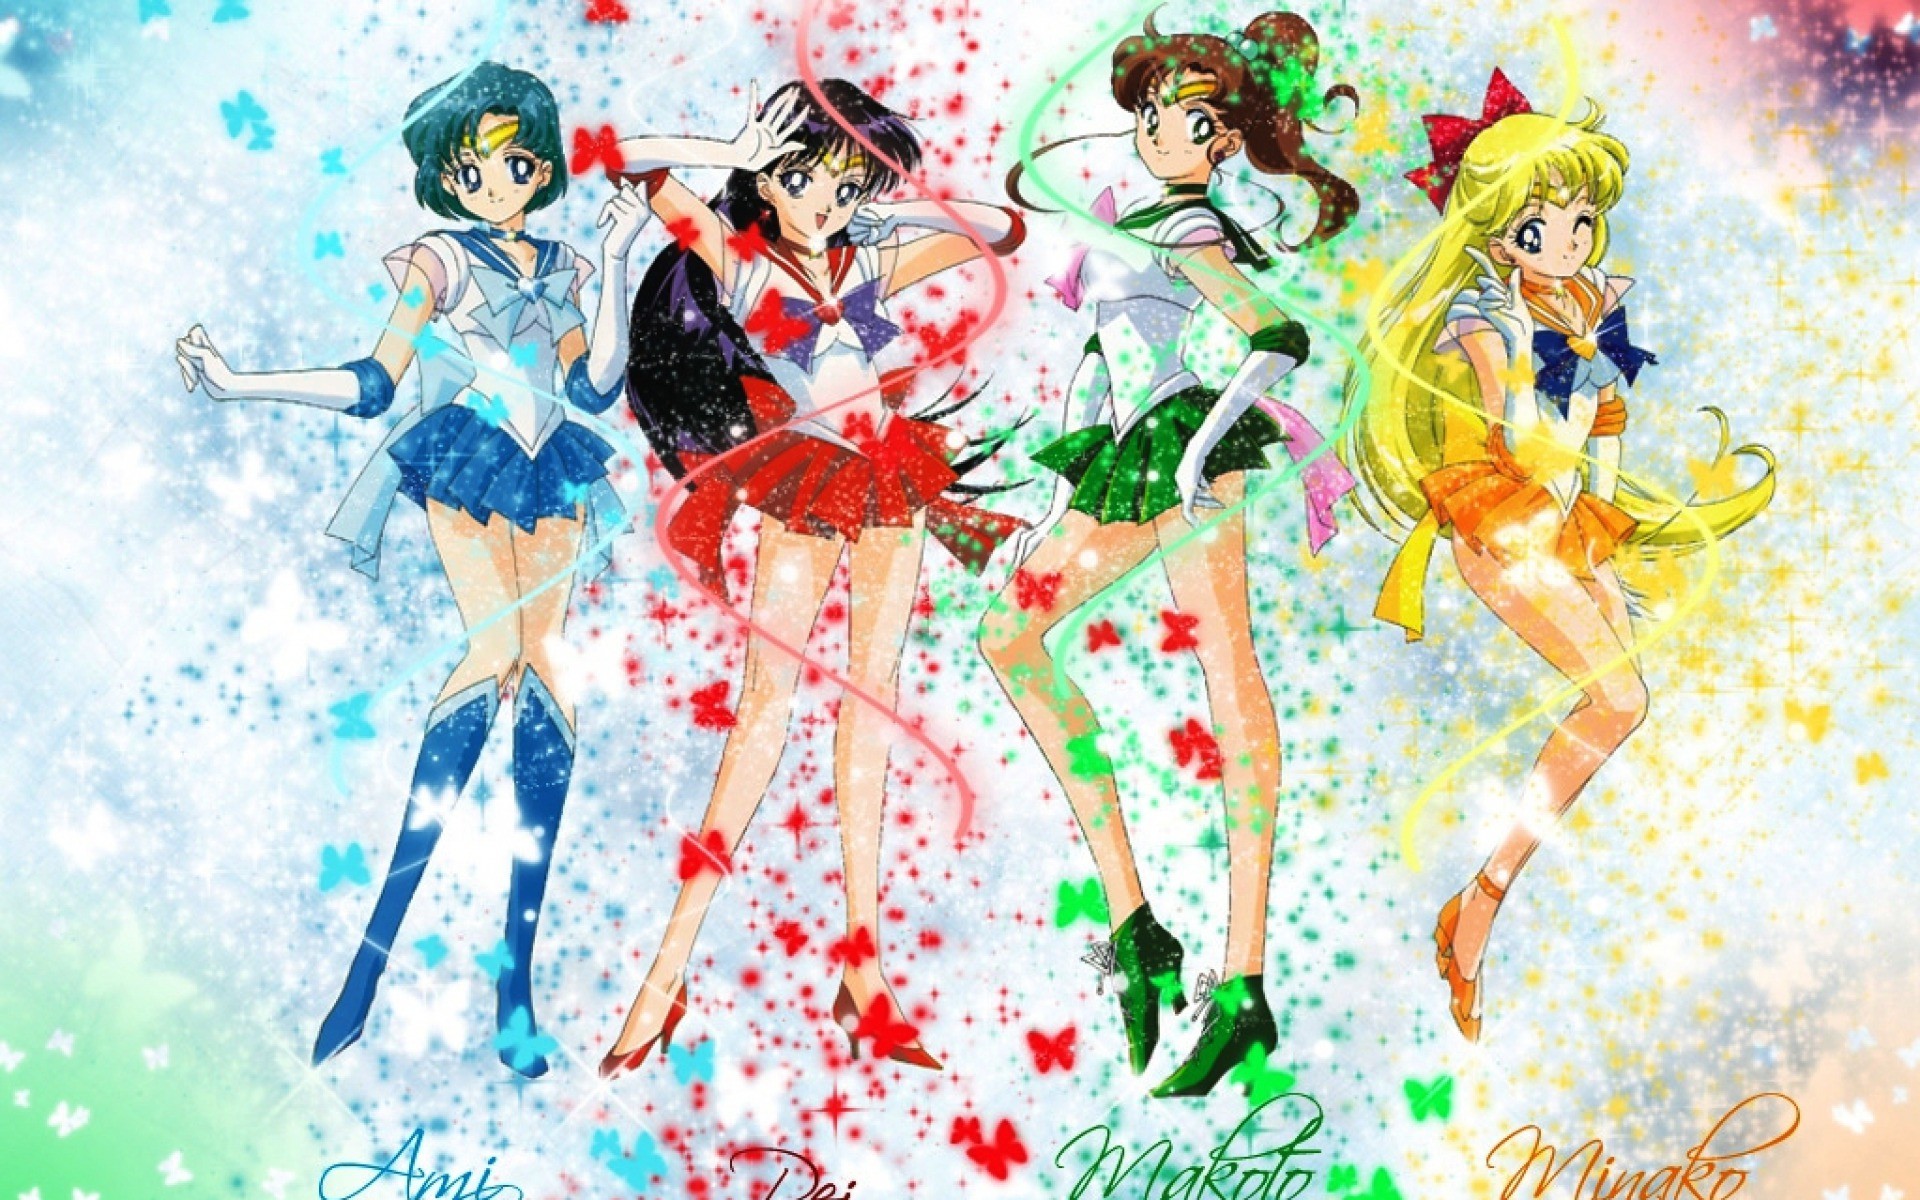 1920x1200  Sailor Moon 77. How to set wallpaper on your desktop? Click the  download link from above and set the wallpaper on the desktop from your OS.